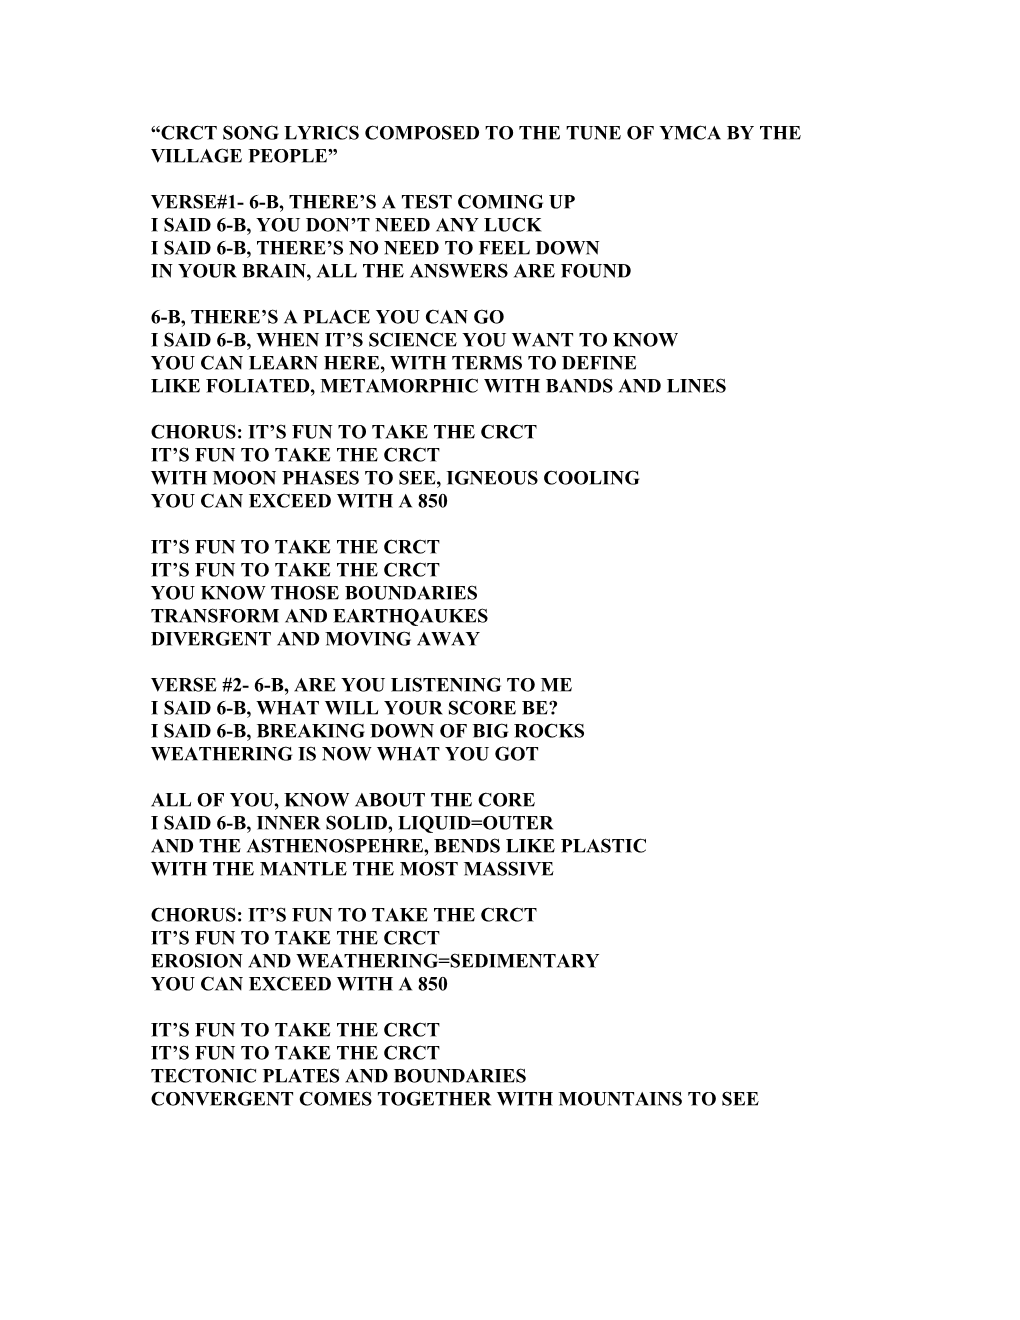 Crct Song Lyrics Composed to the Tune of Ymca by the Village People